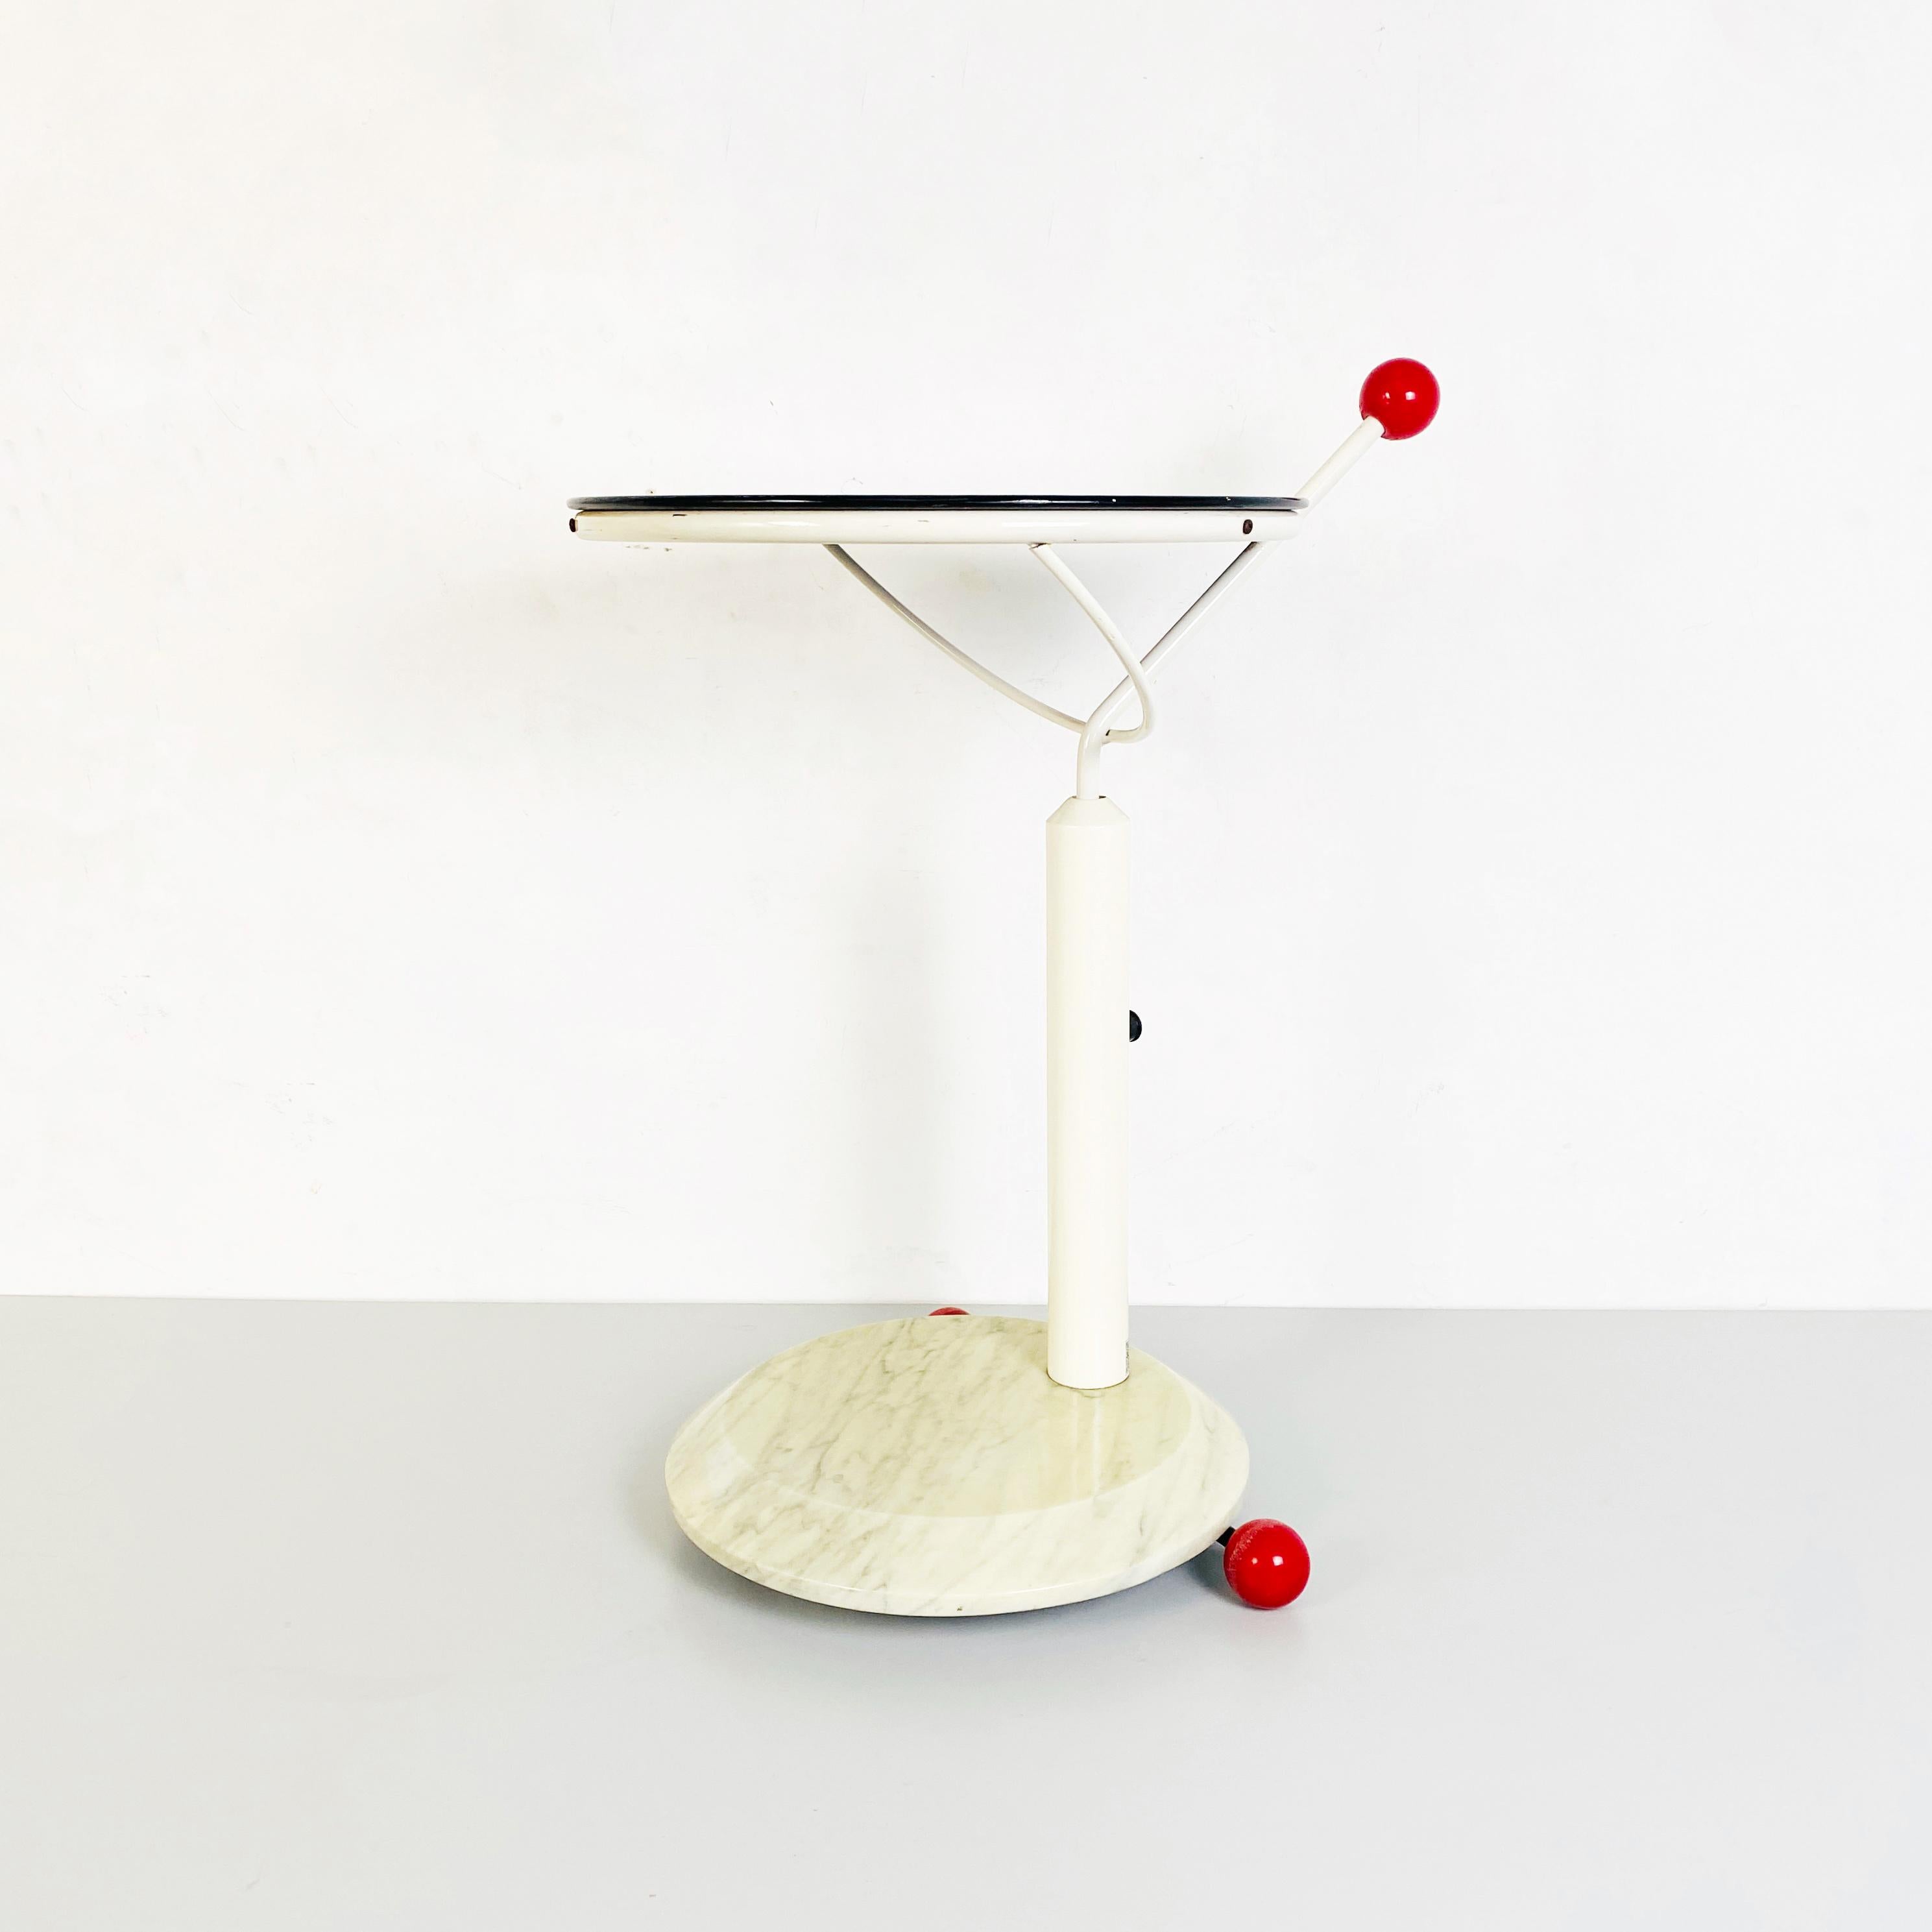 Marble and metal cart with wheels, 1980s
Cart with wheels composed of a white marble base, red plastic wheels, white metal structure and swivel top in black painted wood. There is a handle with a plastic knob to move it easily that bears the mark